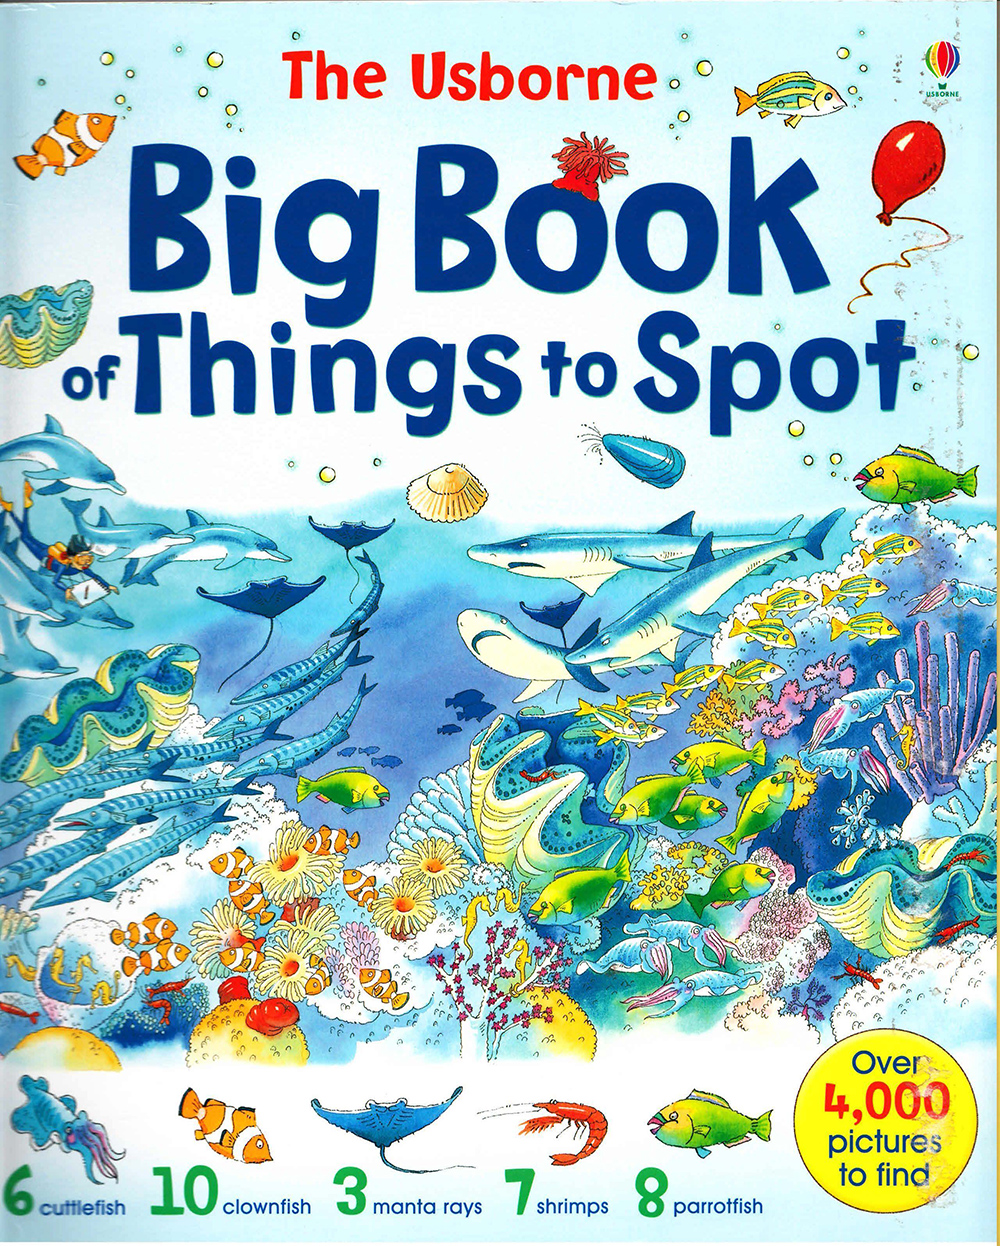 The-Usborne-Big-Book-of-Things-to-Spot.pdf_页面_01